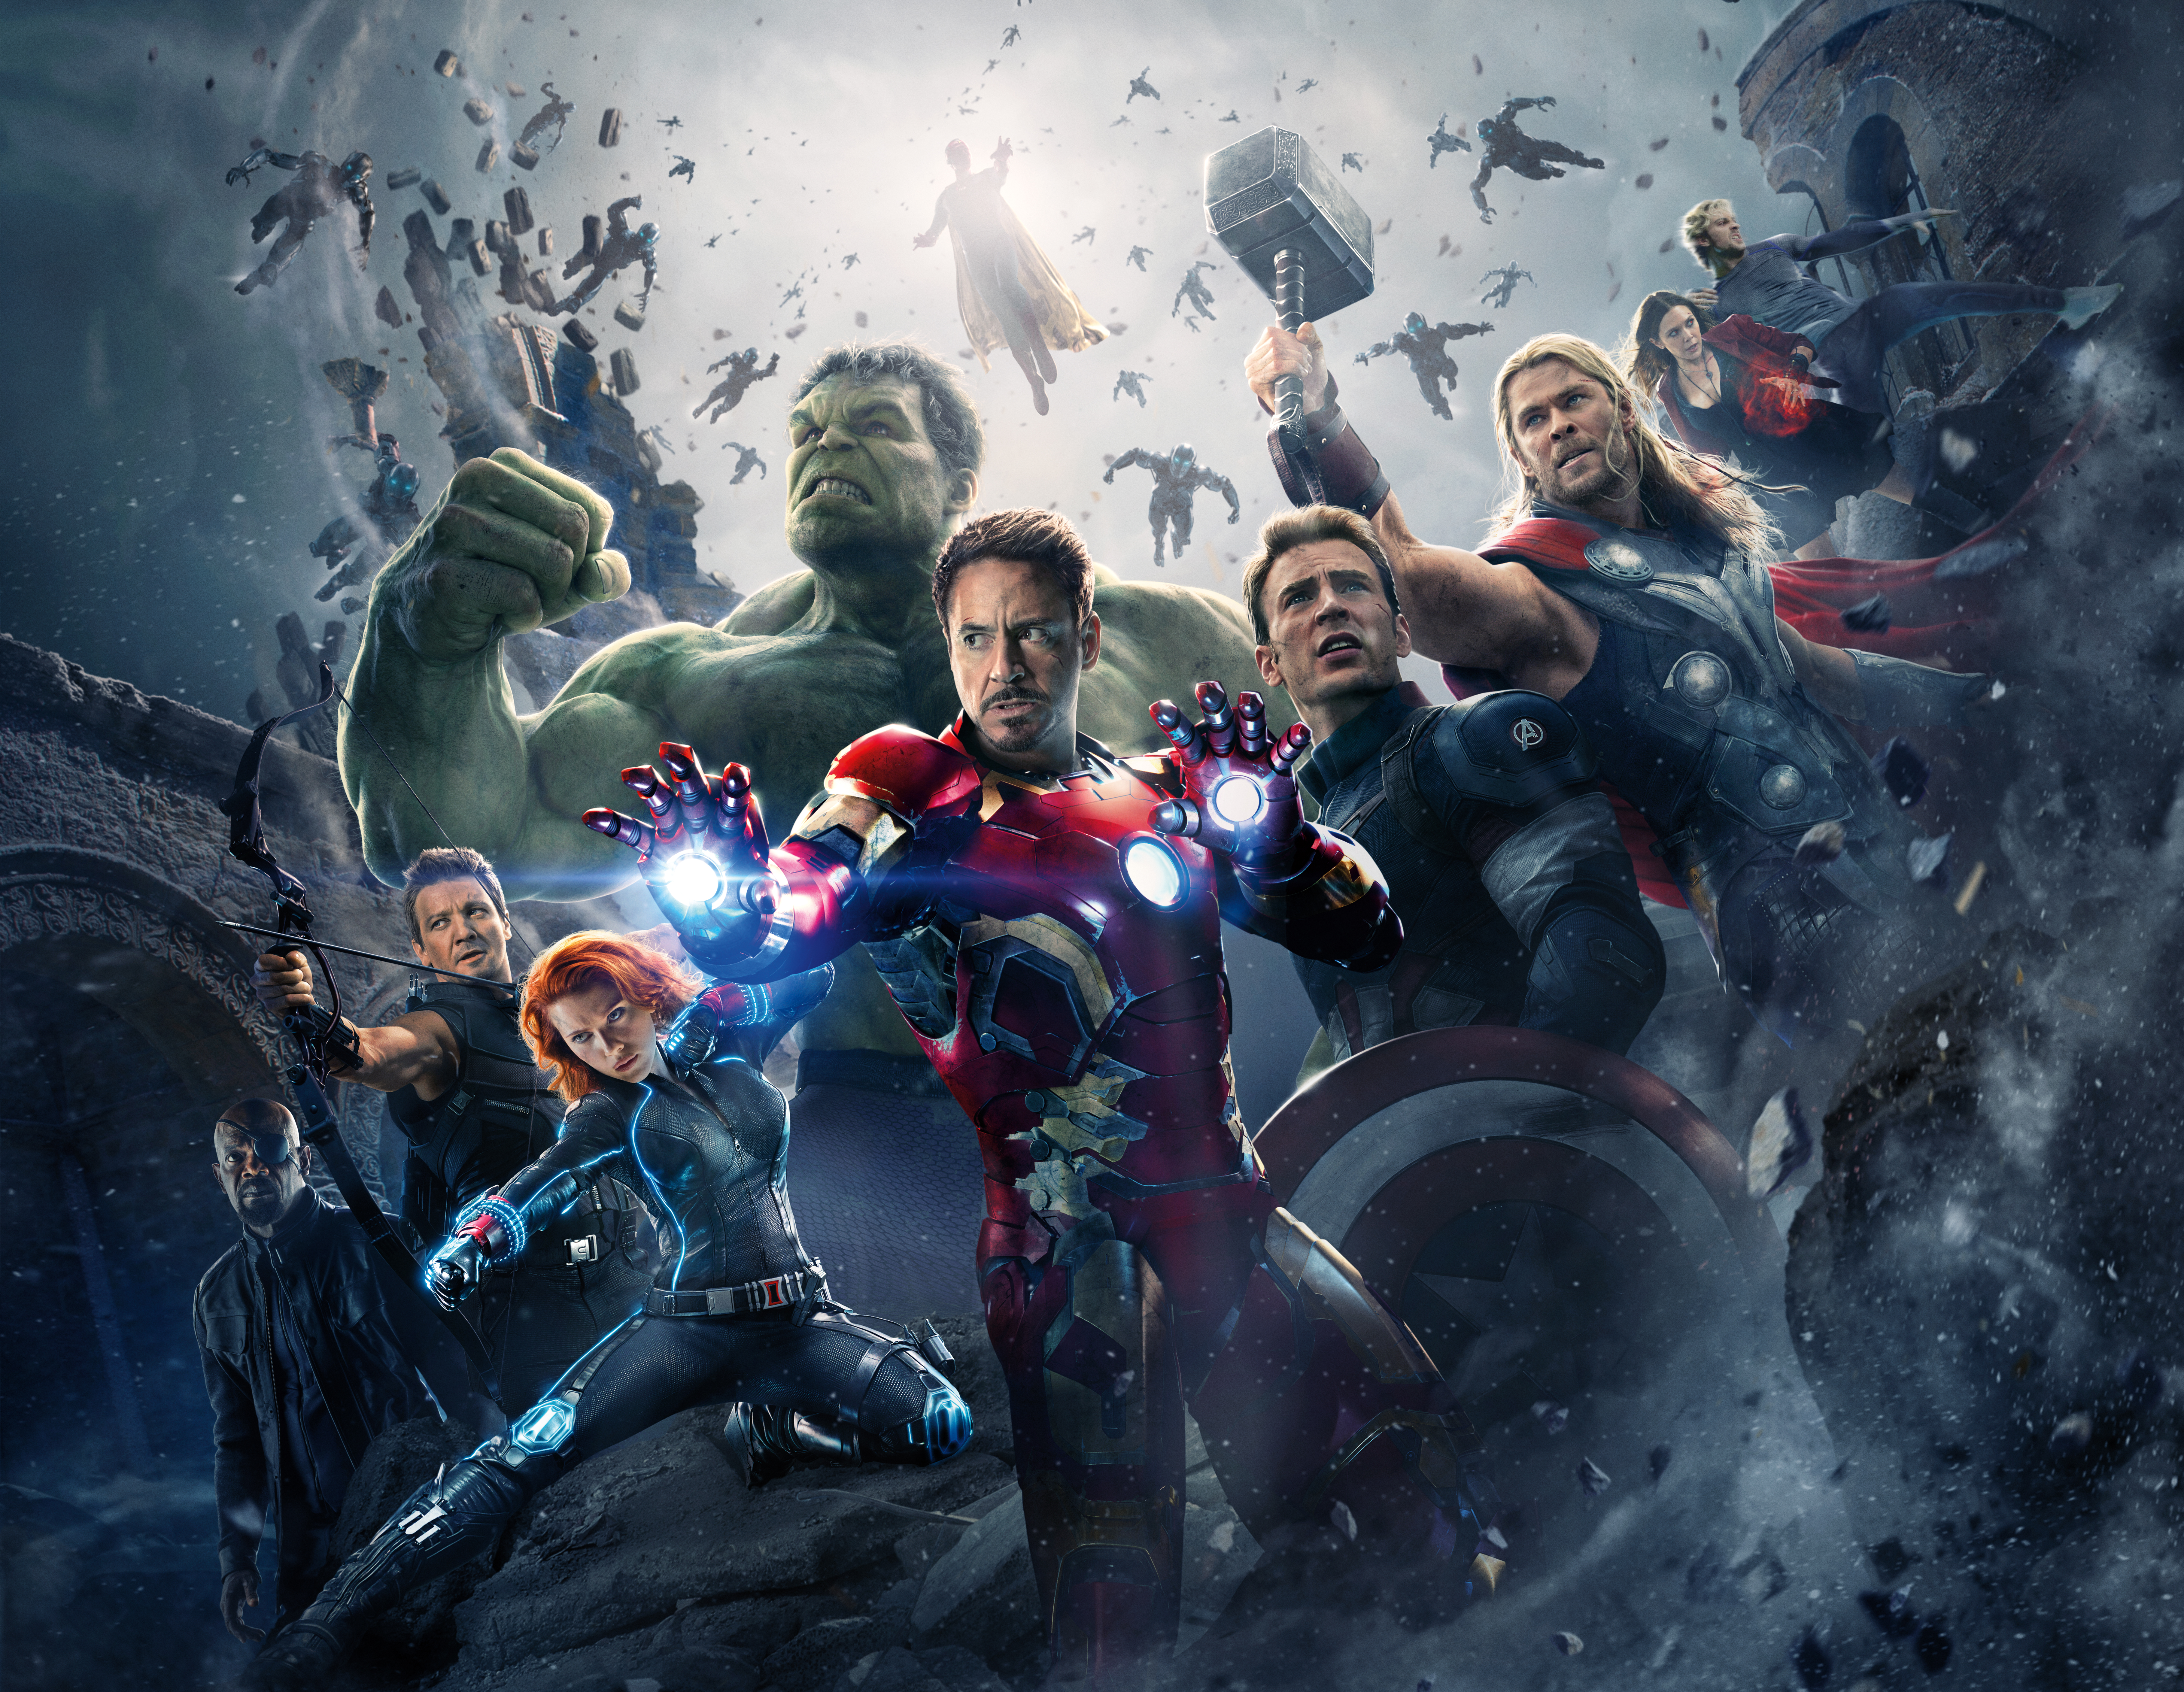 Wallpapers Avengers age of Ultron 2016 film fantasy on the desktop